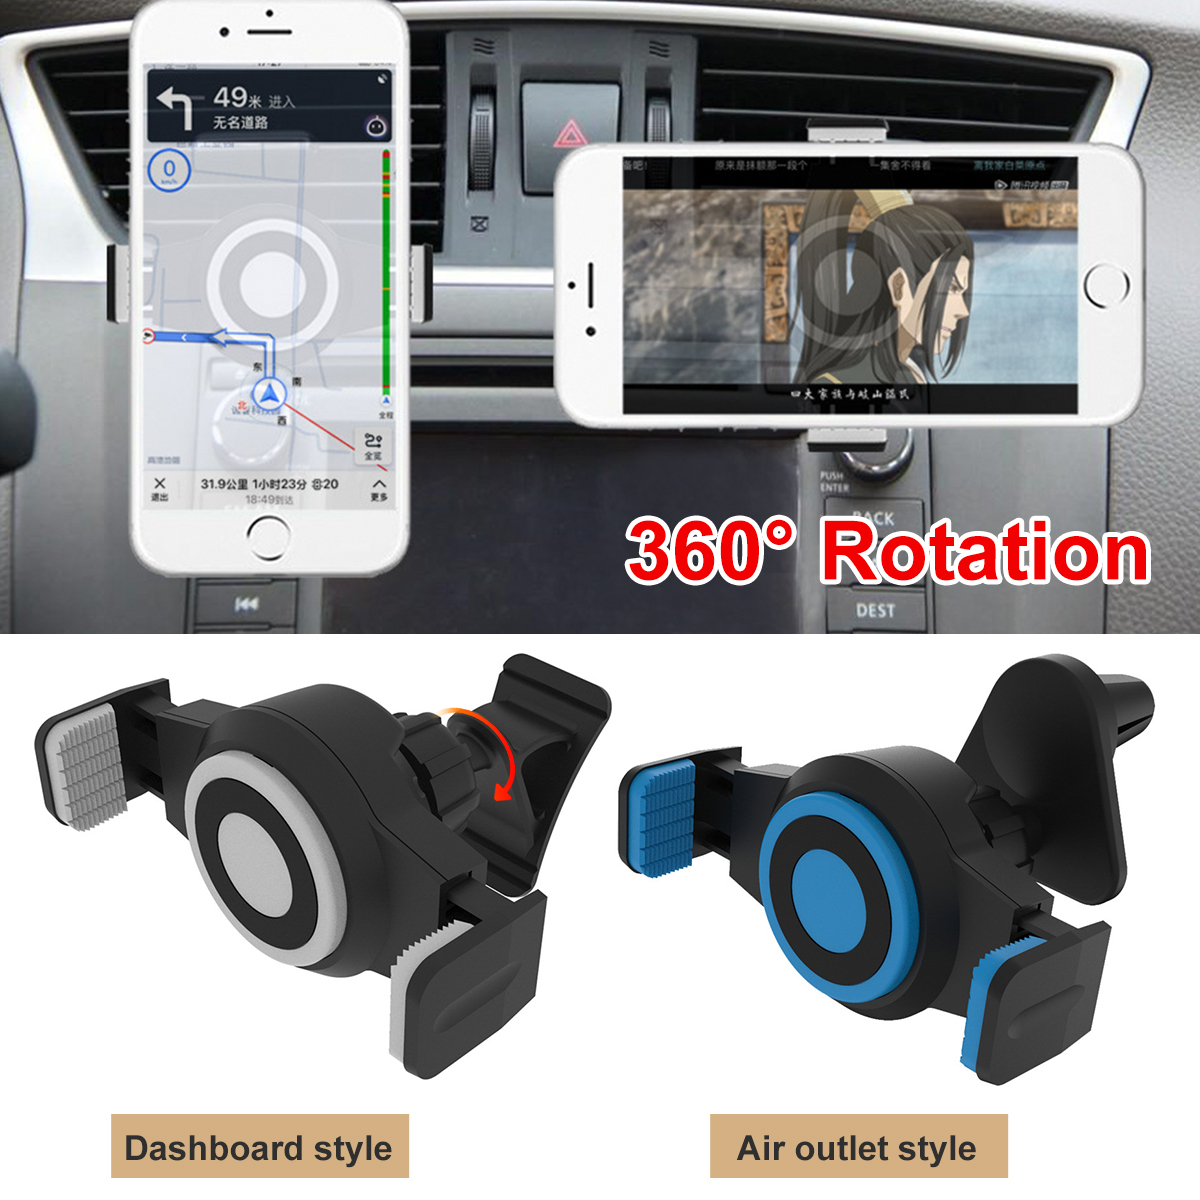 360deg-Rotation-Auto-Lock-Car-Dashboard-Air-Vent-Mobile-Phone-Holder-Stand-Bracket-for-iPhone-12-XS--1821154-1